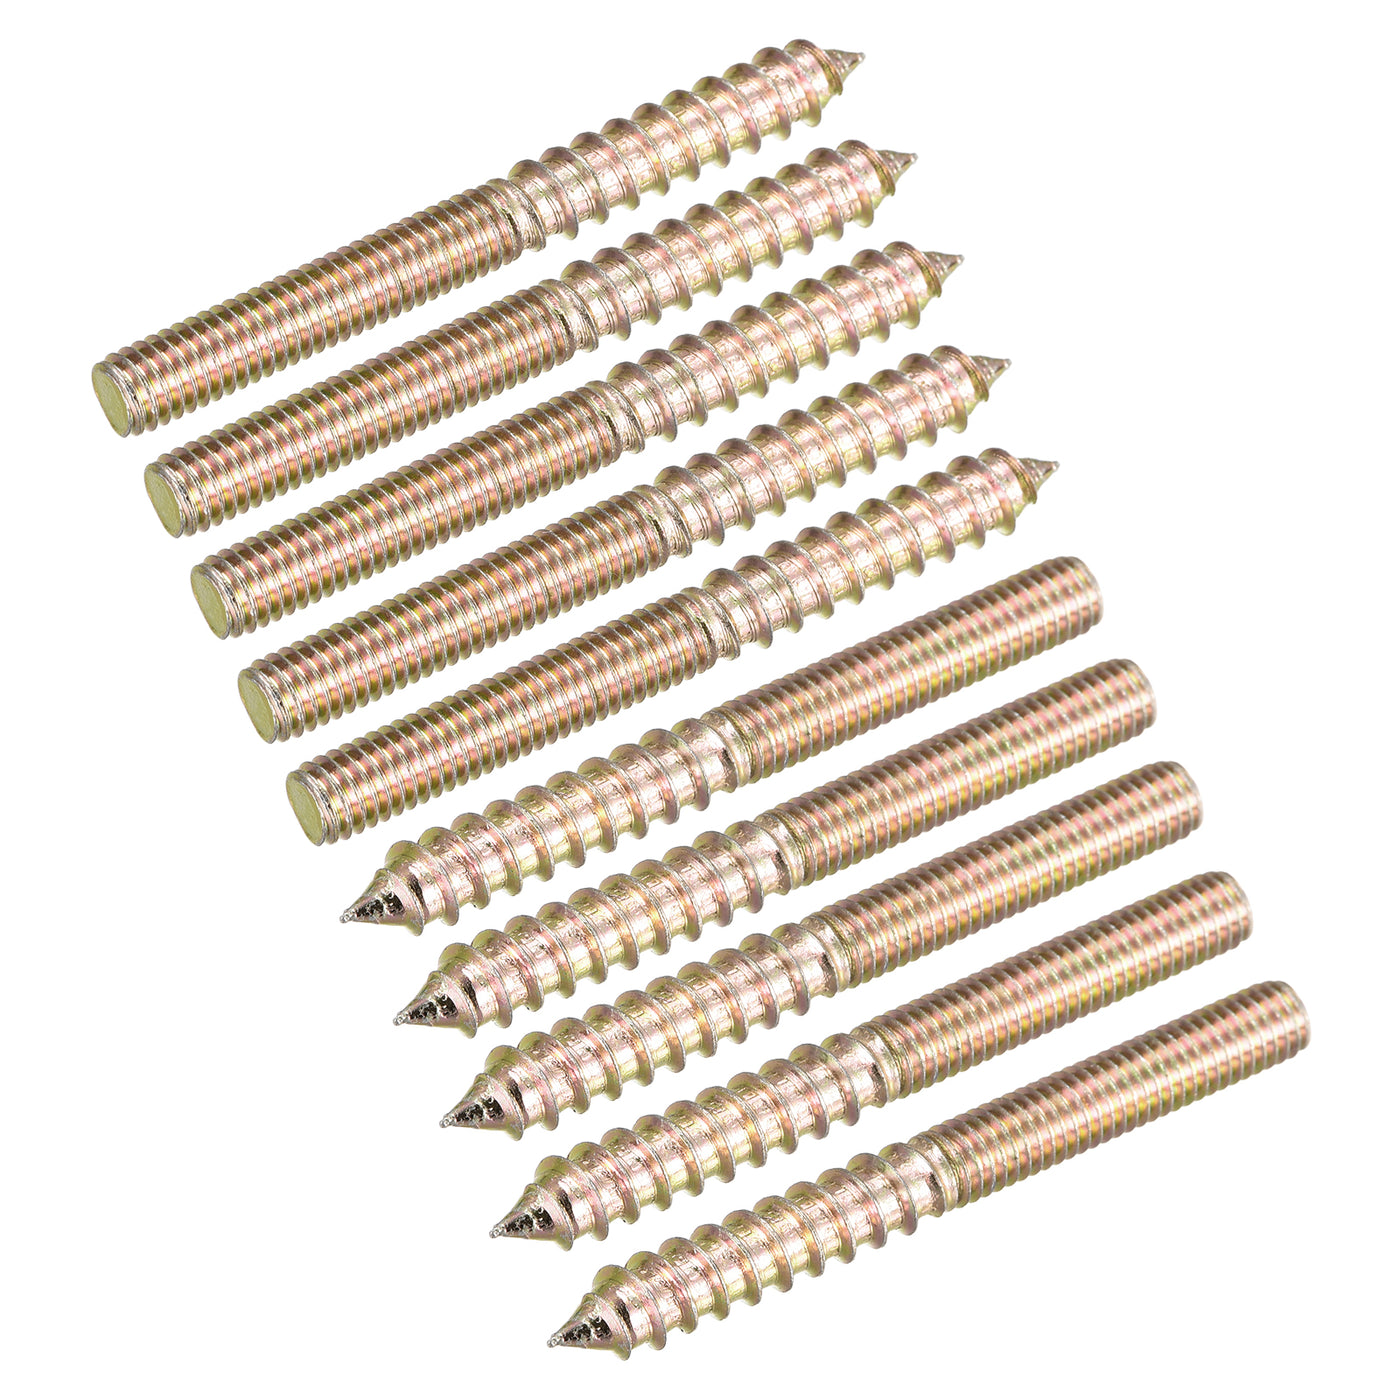 Uxcell Uxcell M10x70mm Hanger Bolts, 48pcs Double Ended Thread Dowel Screws for Wood Furniture